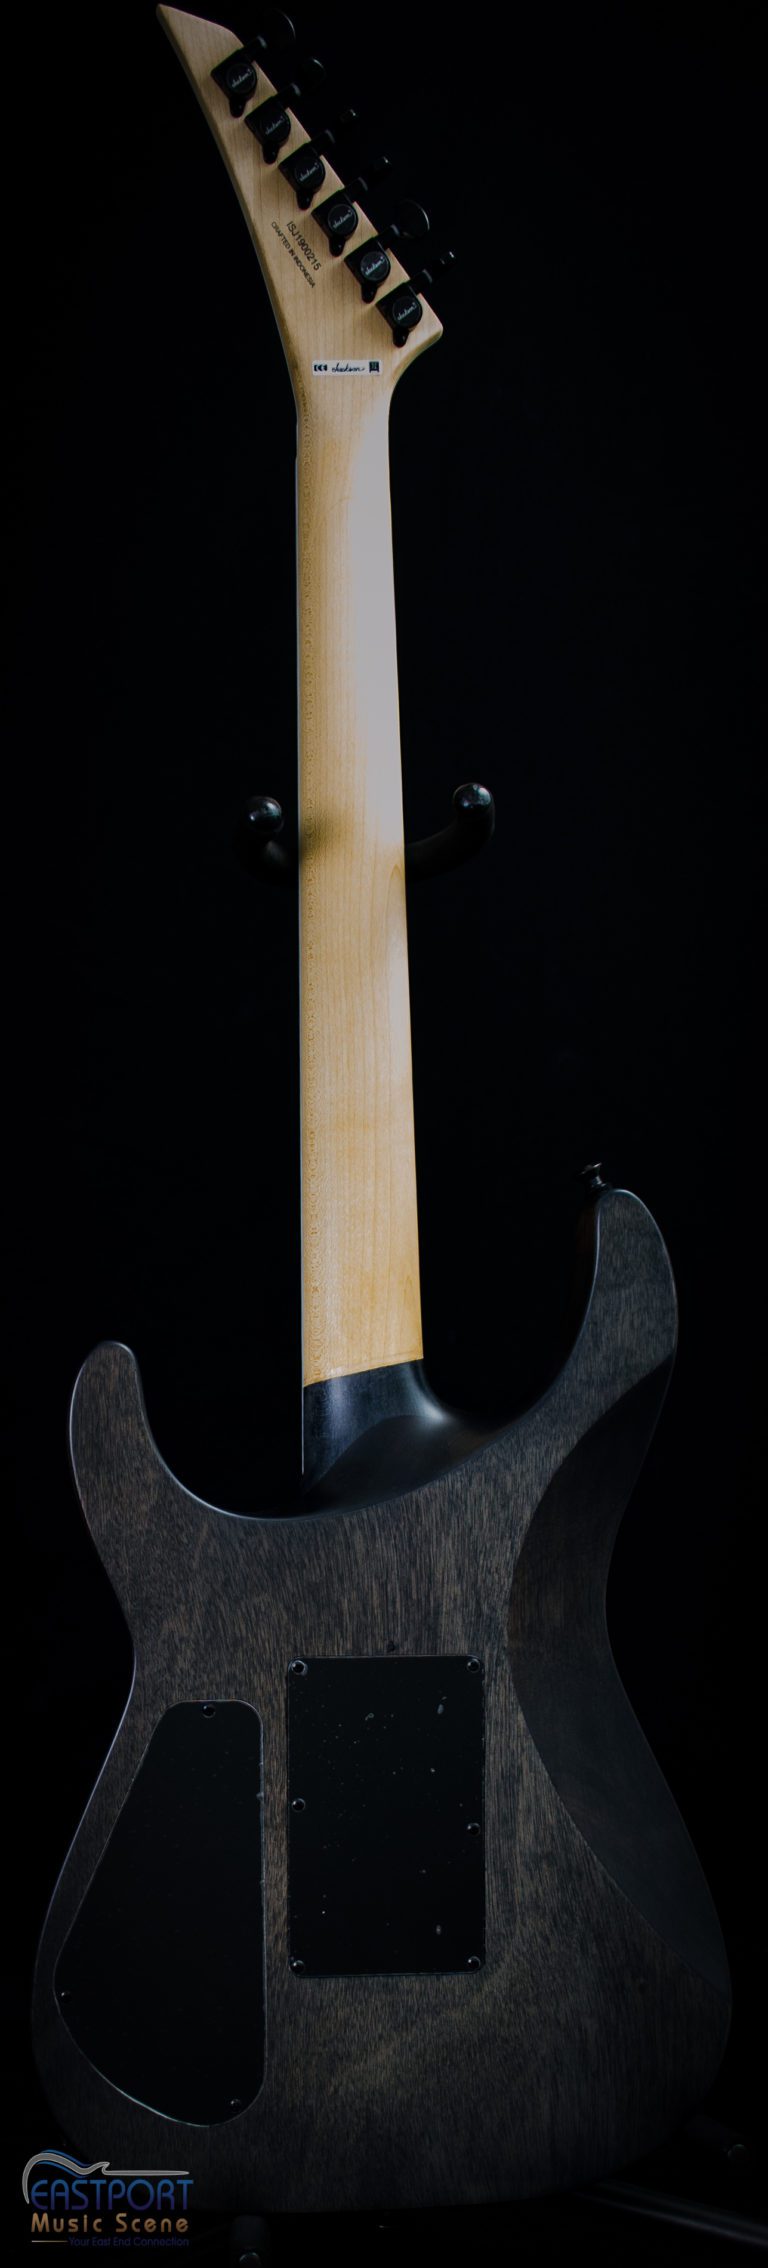 A guitar with a black handle and white neck.